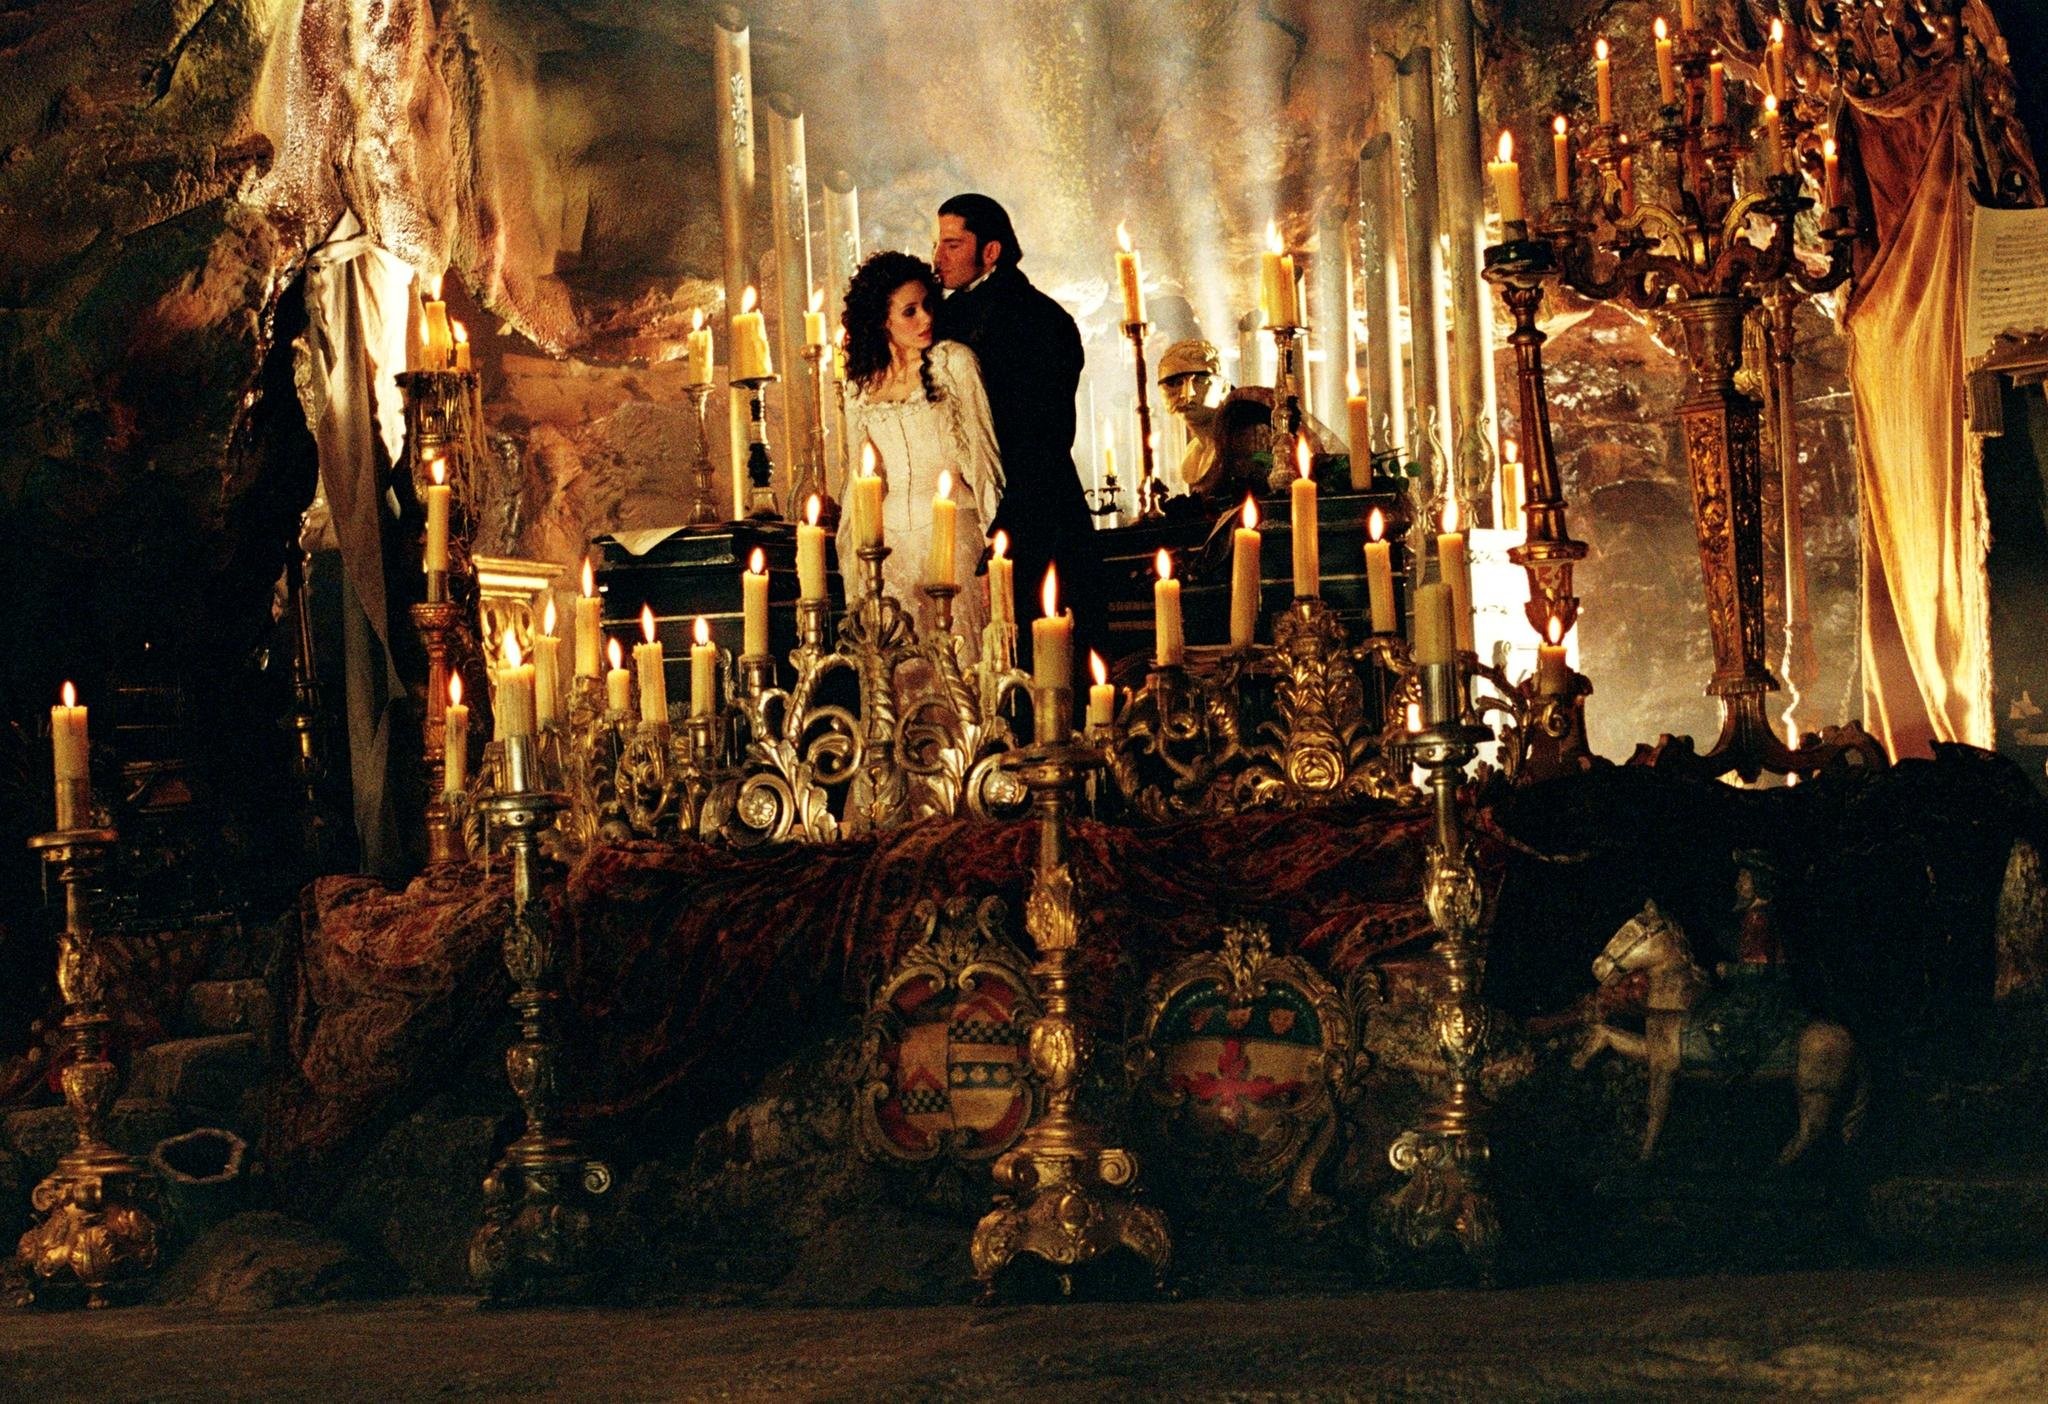 The Phantom (Gerard Butler) takes Christine Daae (Emmy Rossum) to his lair in The Phantom of the Opera (2004)